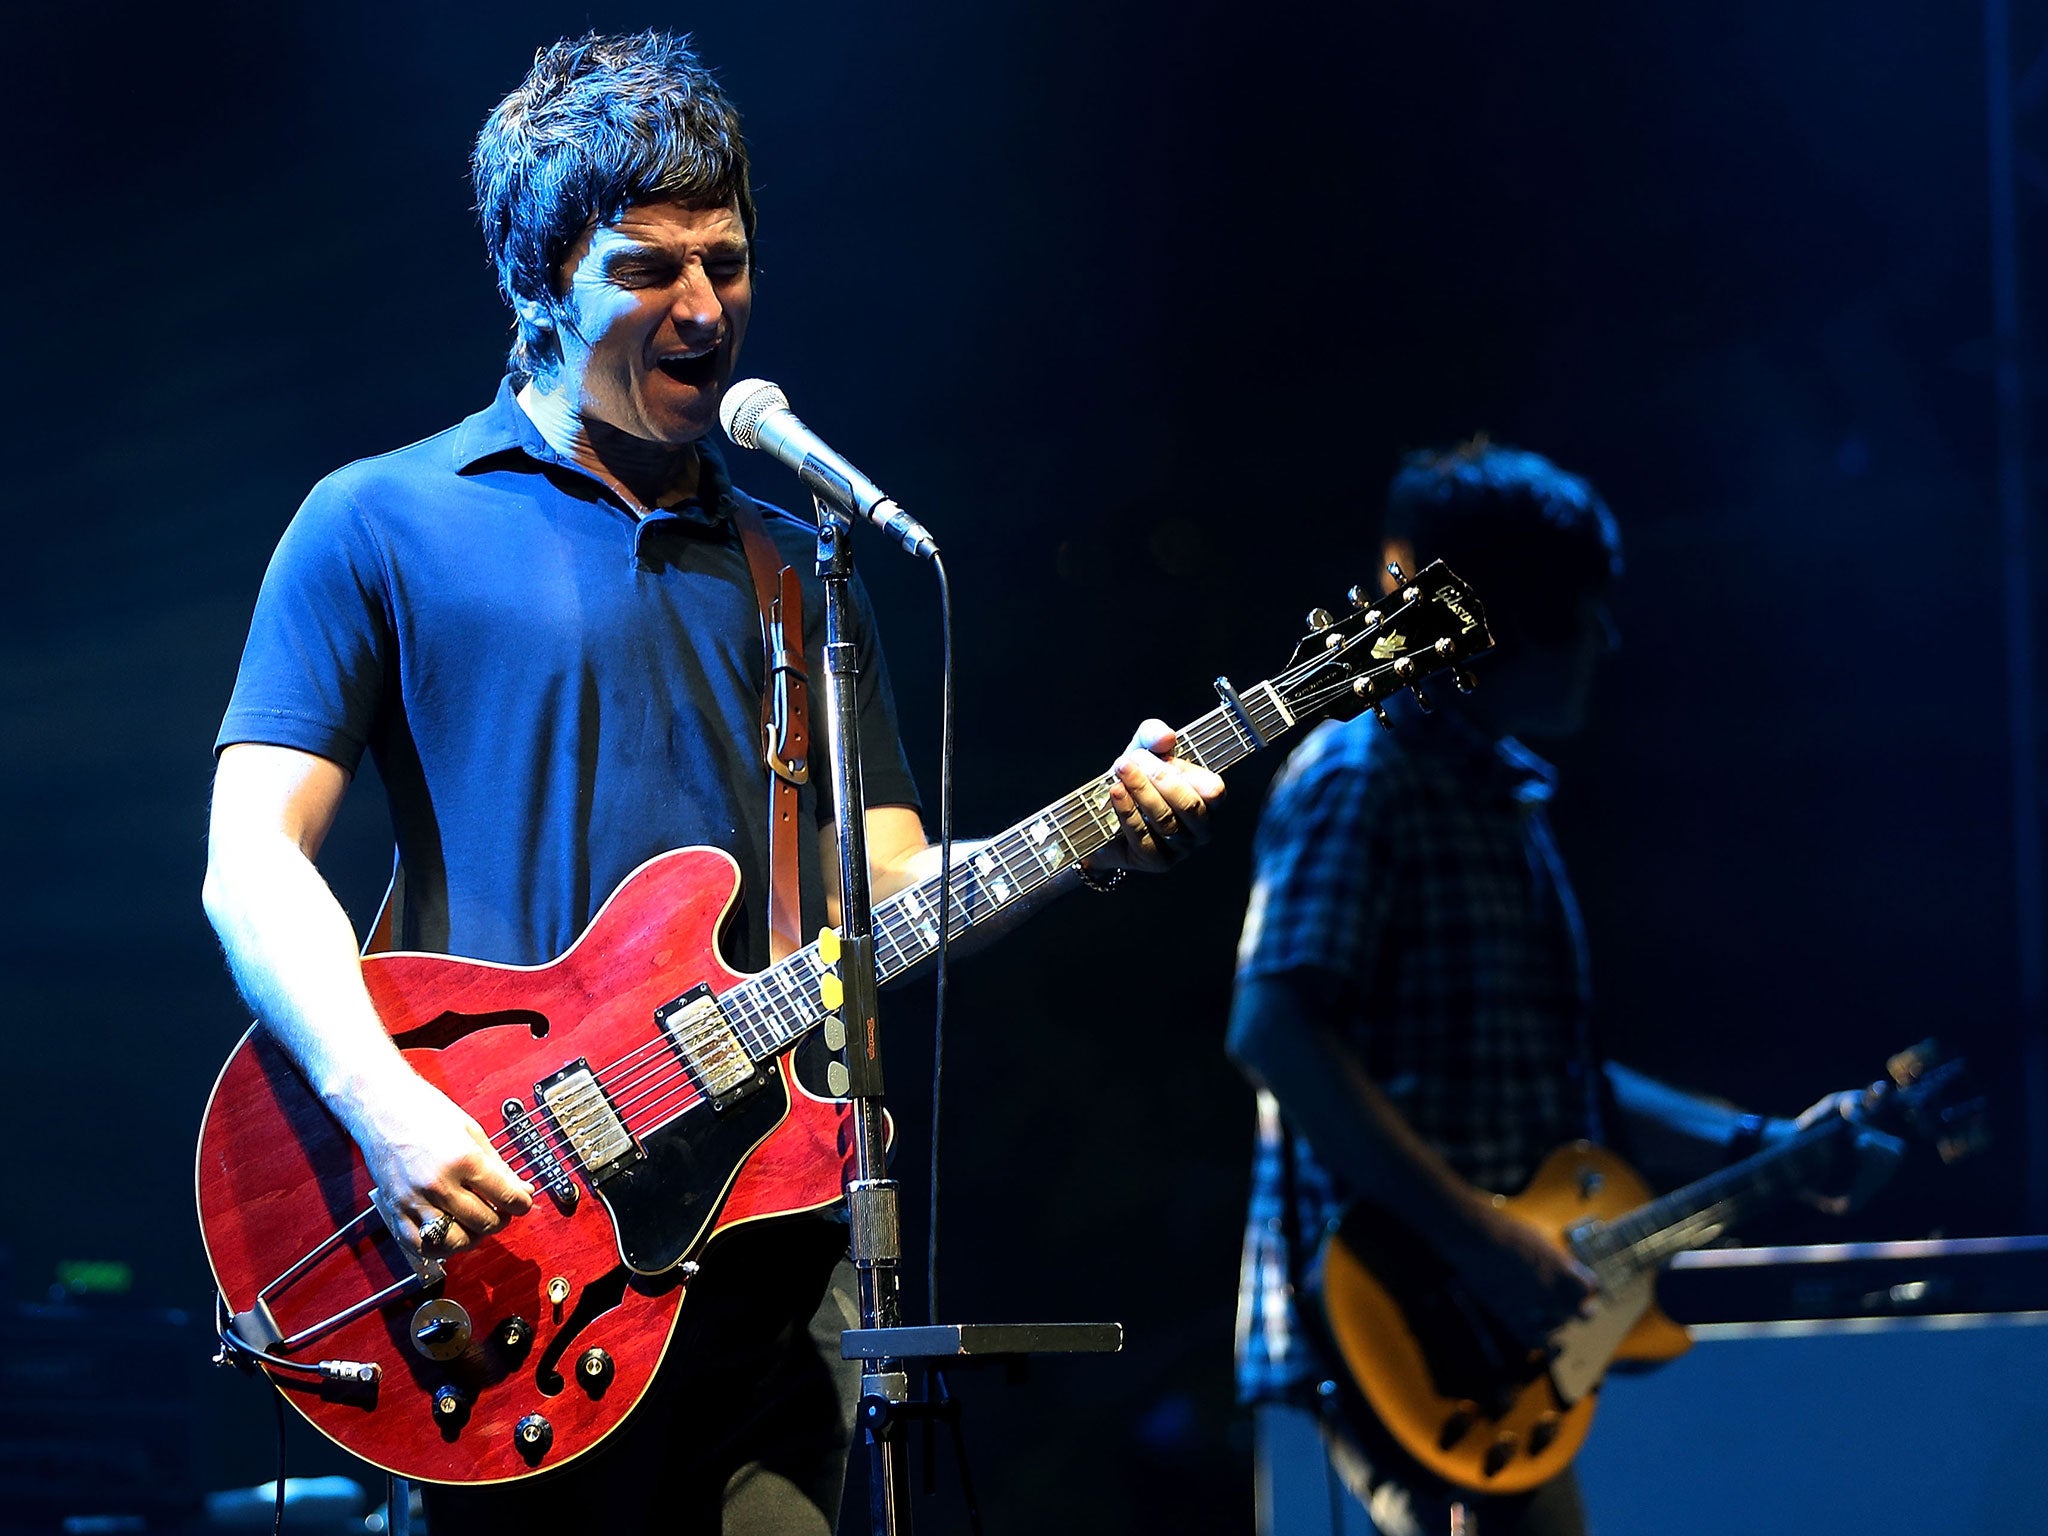 Noel Gallagher performs with Noel Gallagher's Flying Birds in Singapore